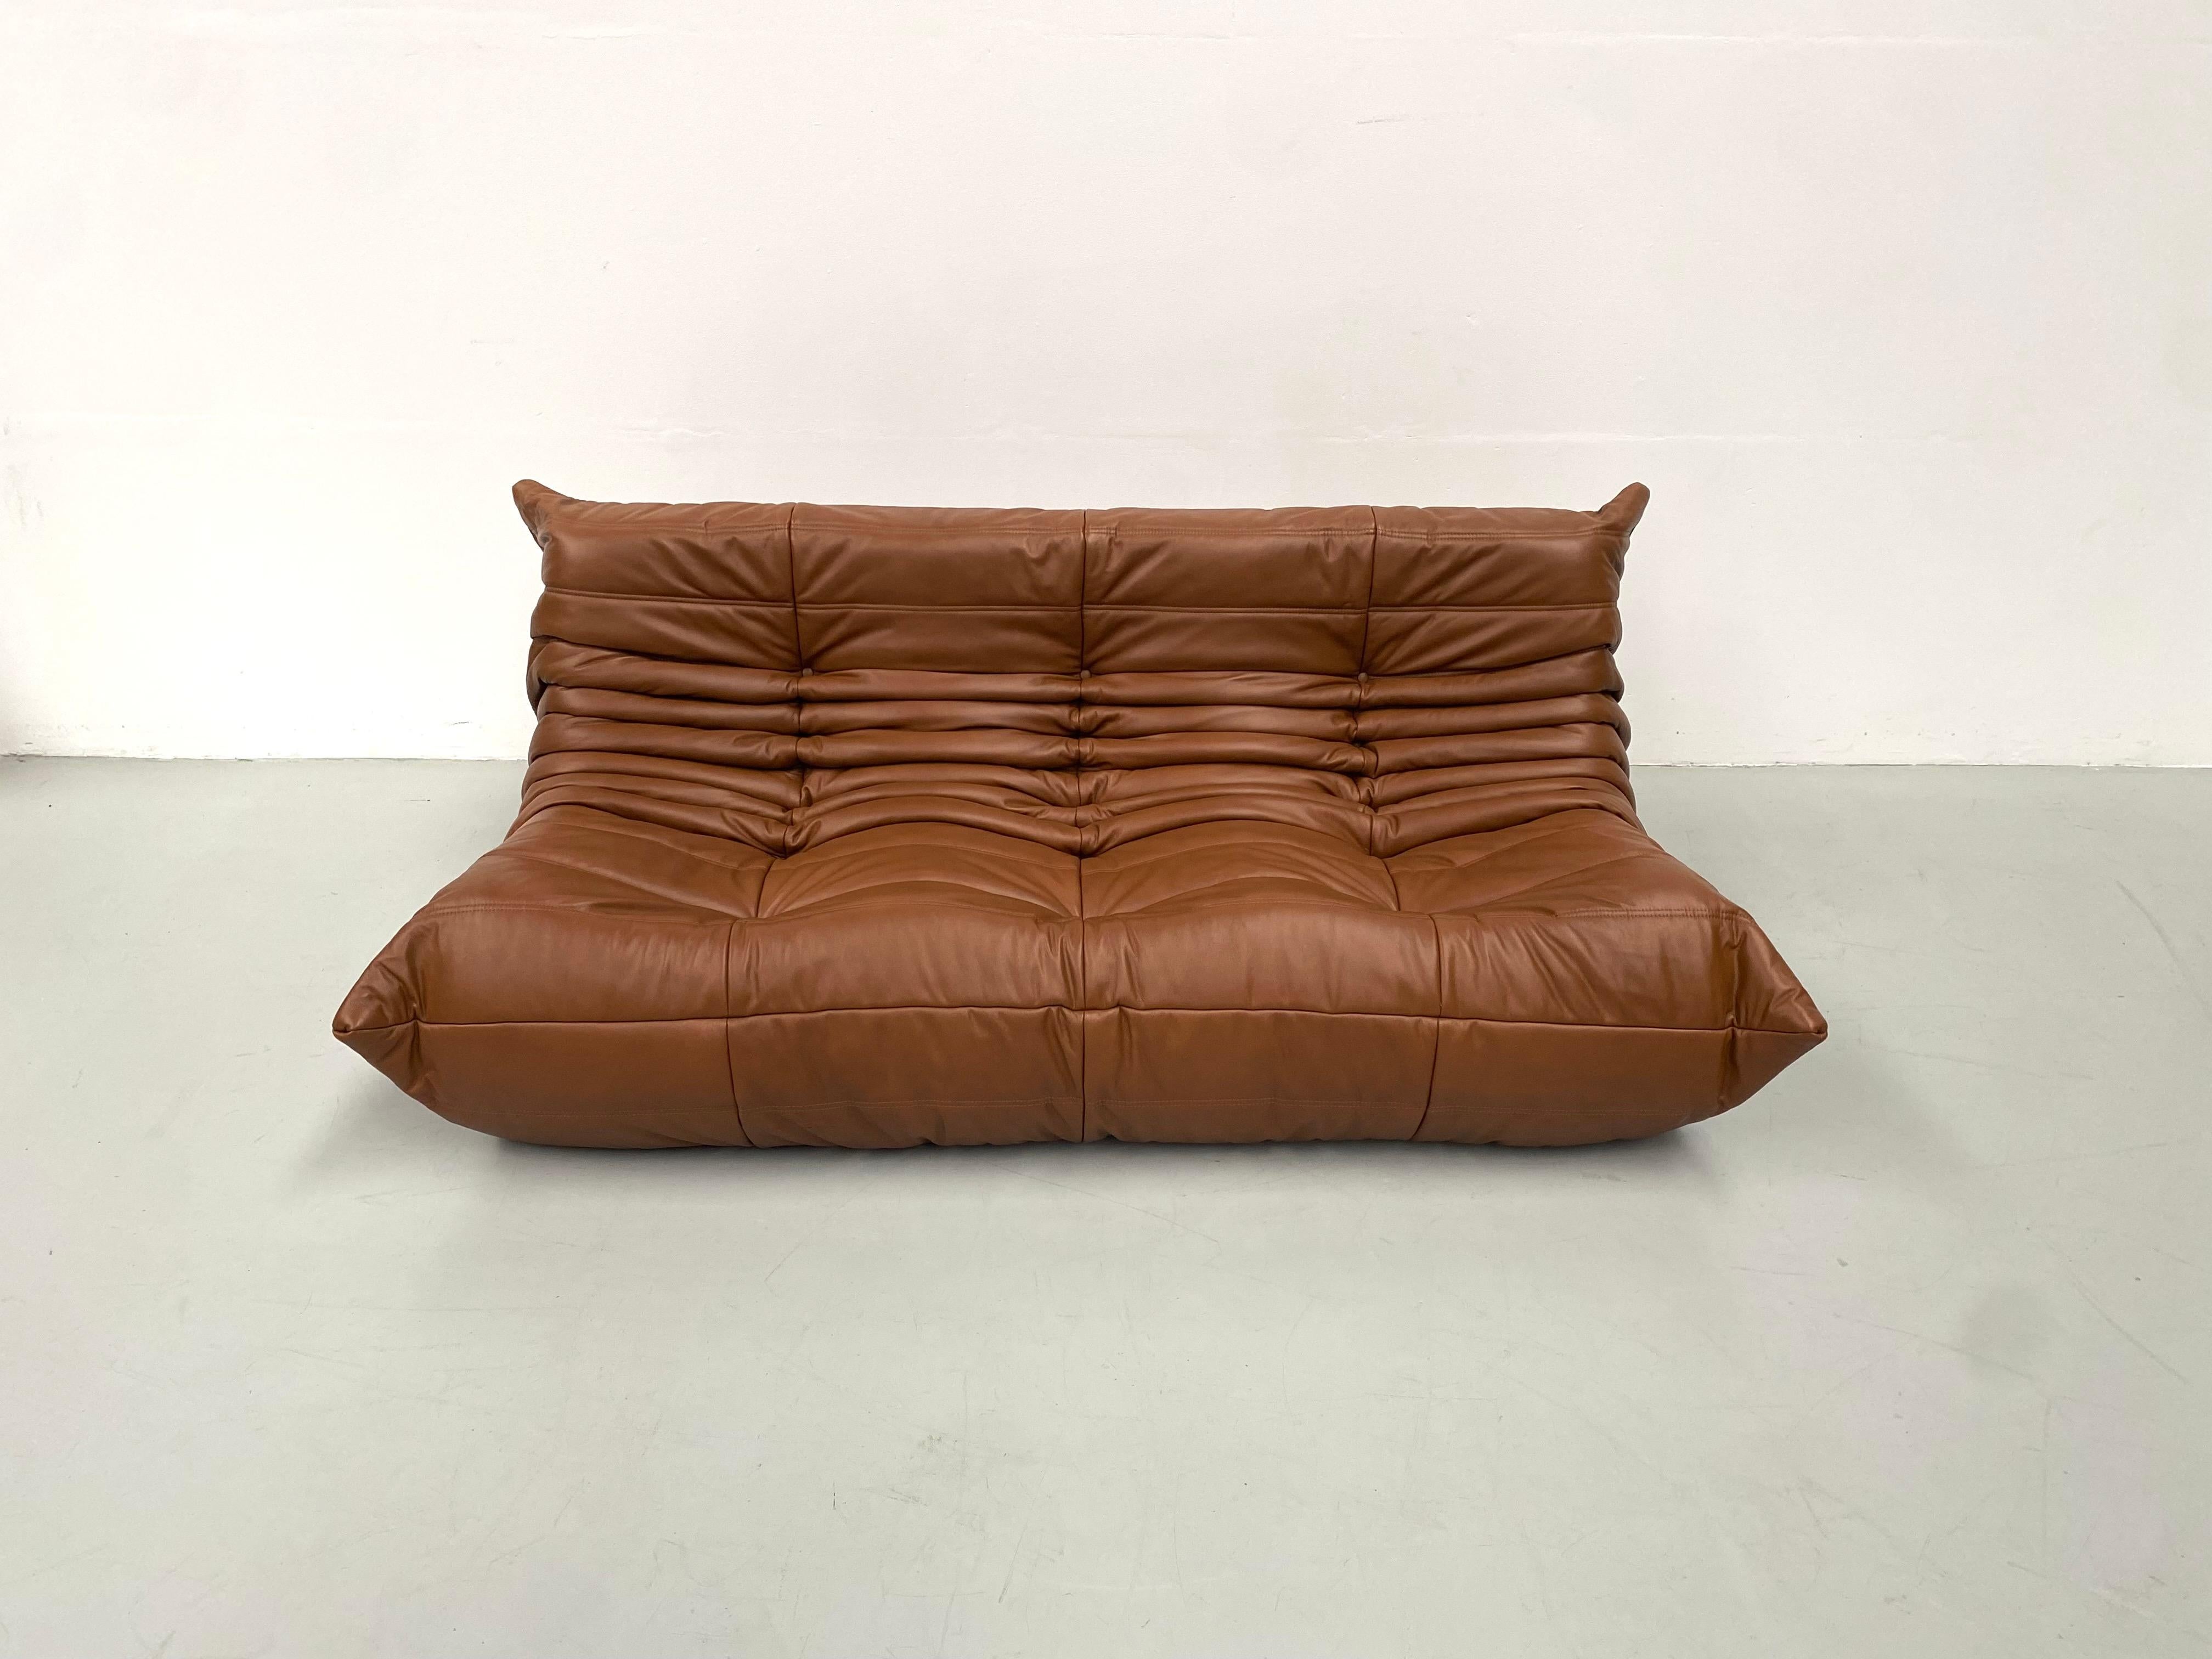 Mid-Century Modern French Togo Sofa in Dark Cognac Leather by M. Ducaroy for Ligne Roset, 1970s